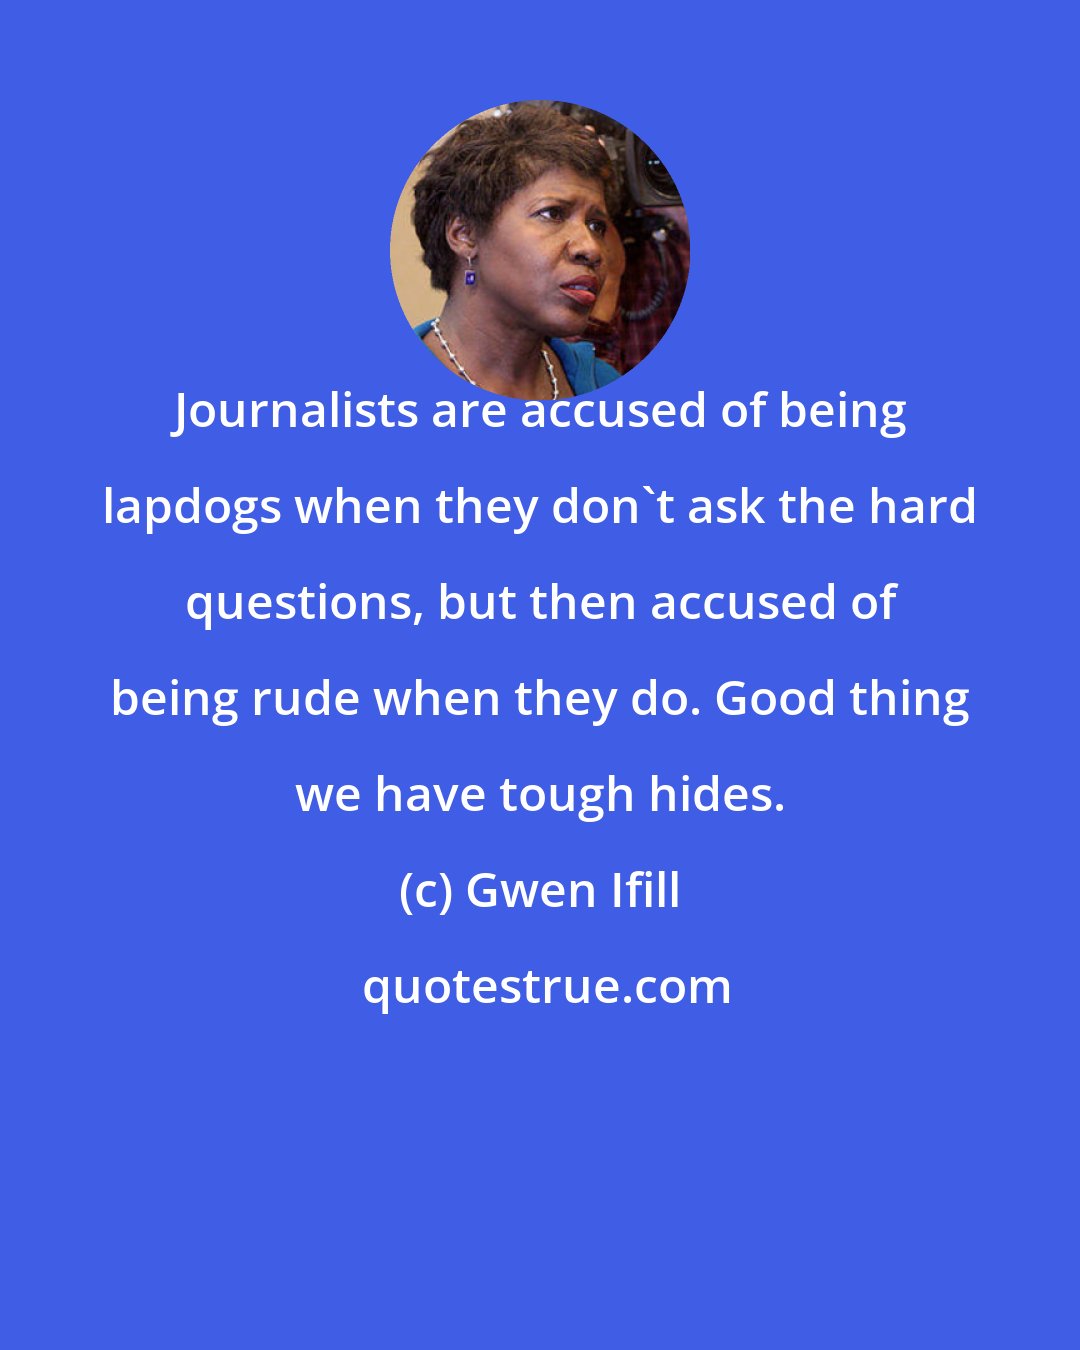 Gwen Ifill: Journalists are accused of being lapdogs when they don't ask the hard questions, but then accused of being rude when they do. Good thing we have tough hides.